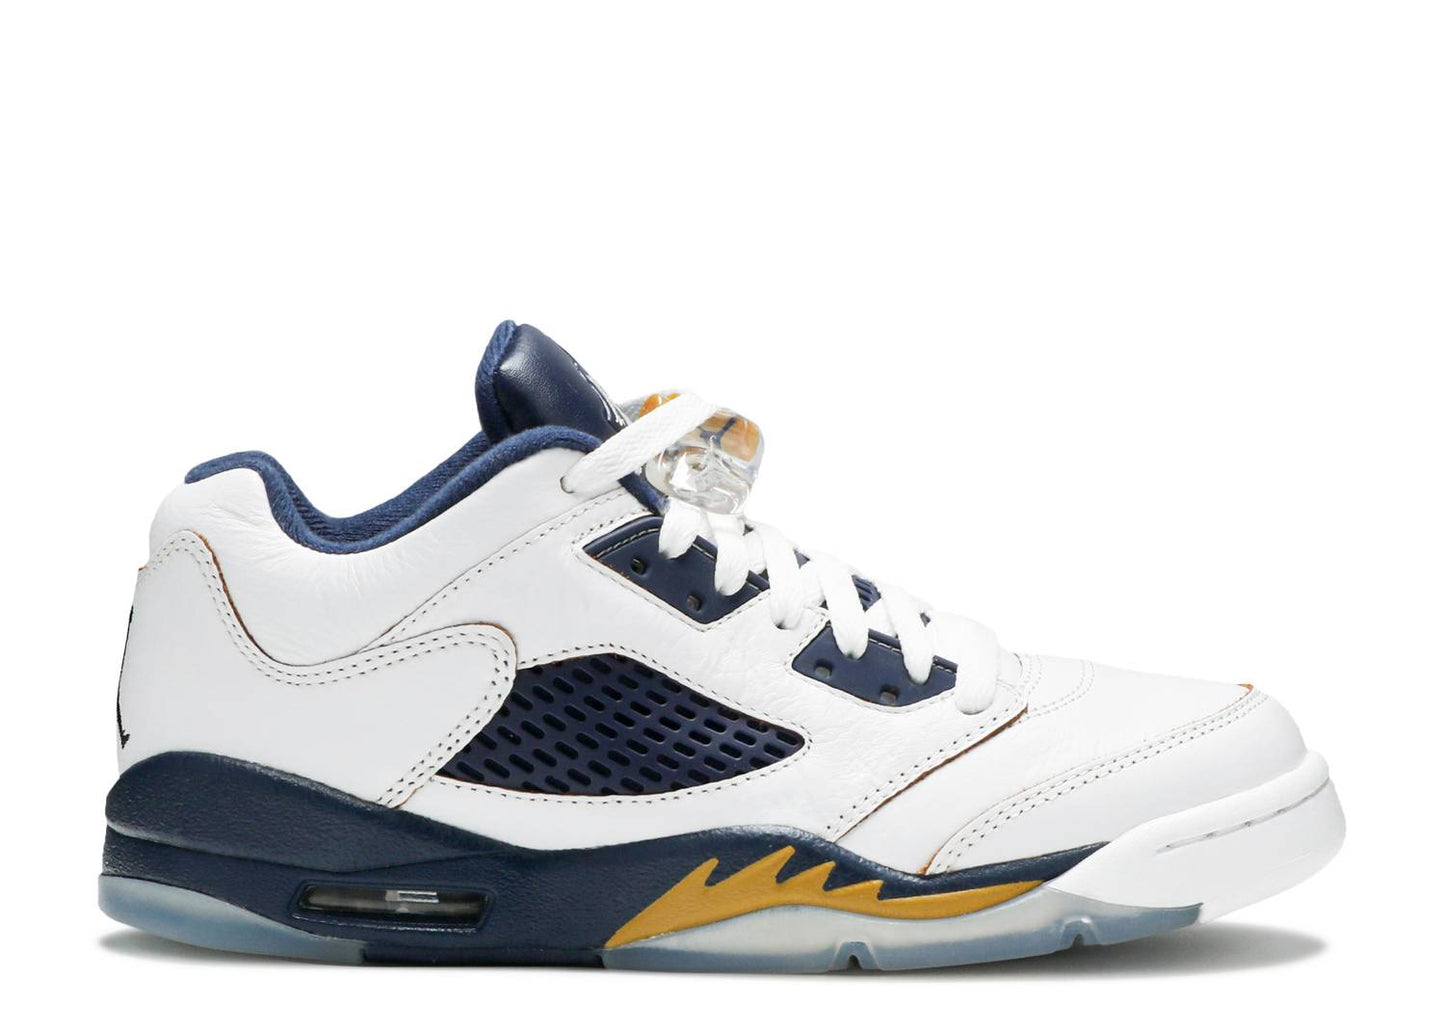 GS Jordan 5 Low "Dunk From Above"